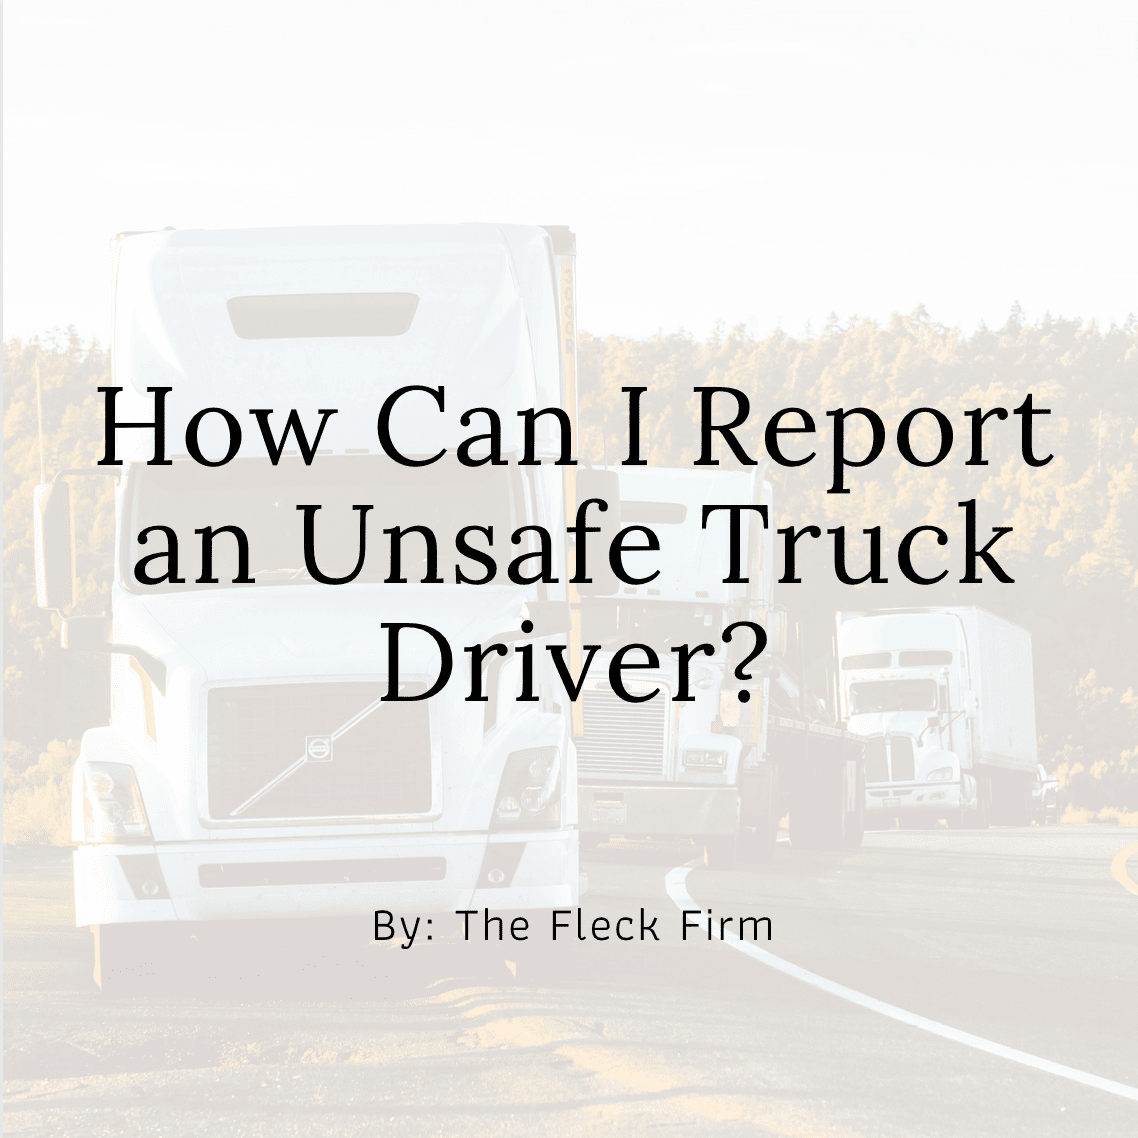 How can I report unsafe truck drivers that could cause an accident